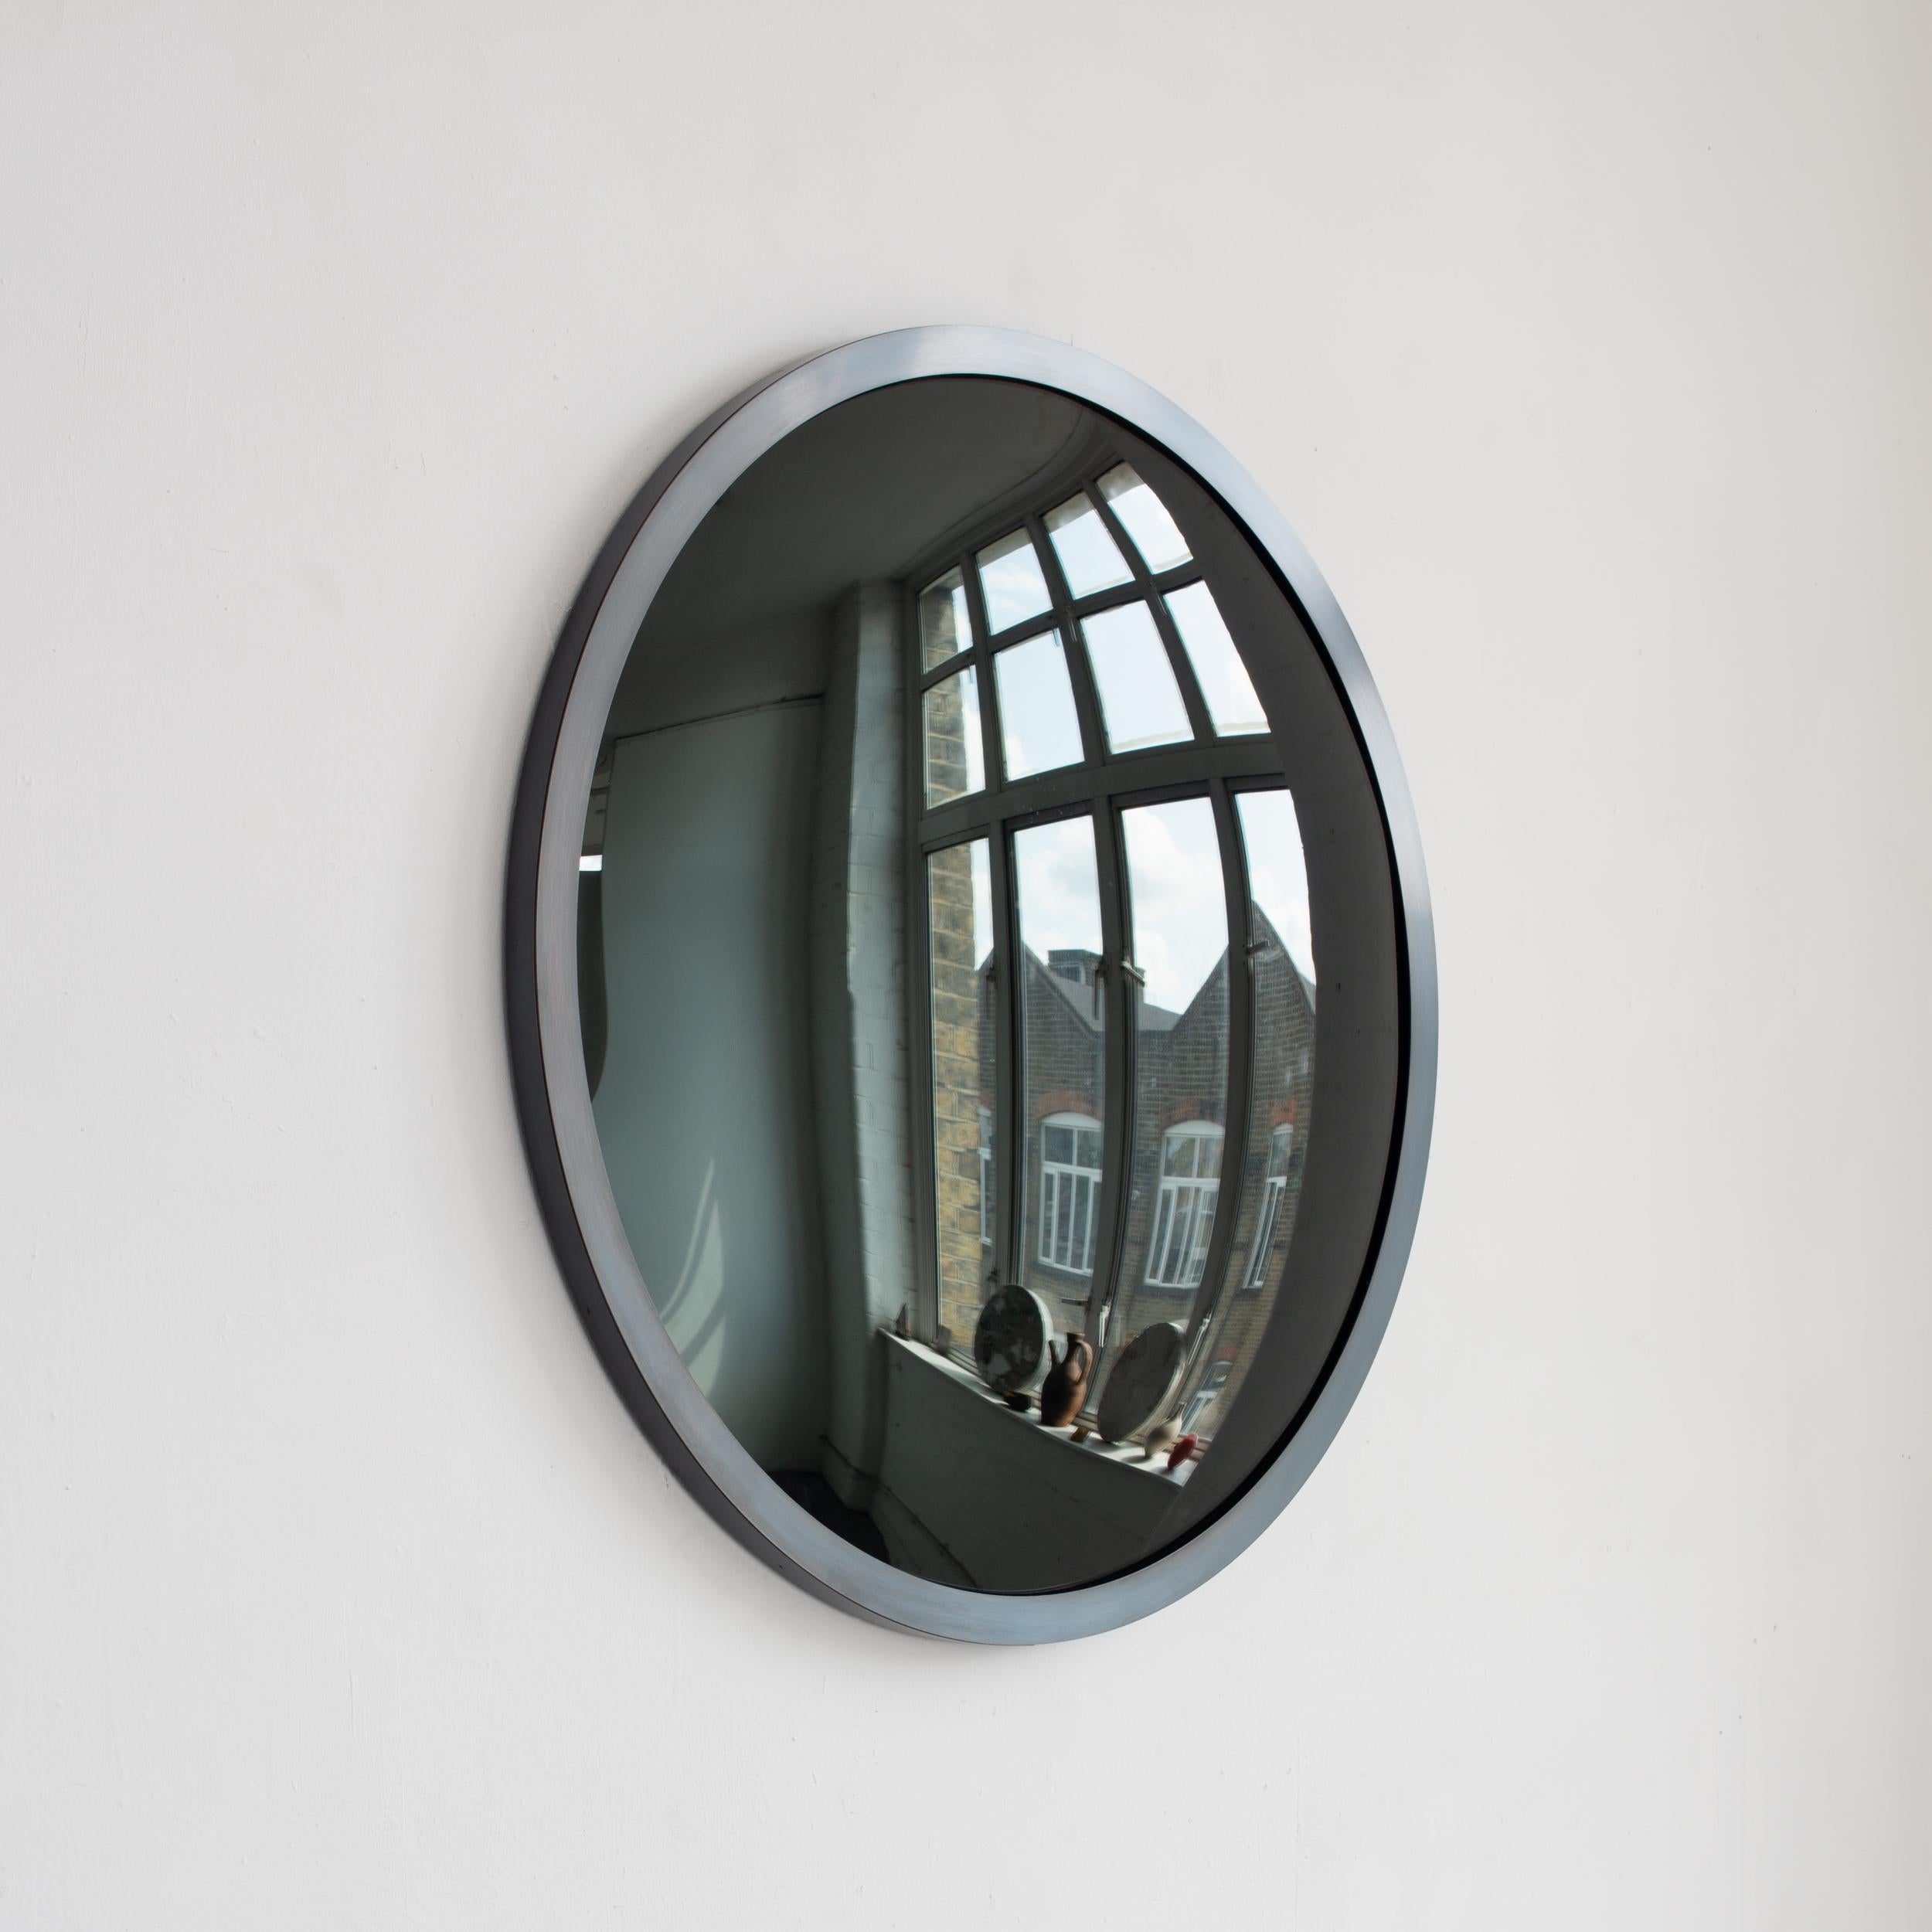 British In Stock Orbis Round Black Tinted Convex Mirror, Blackened Metal Frame, Large For Sale